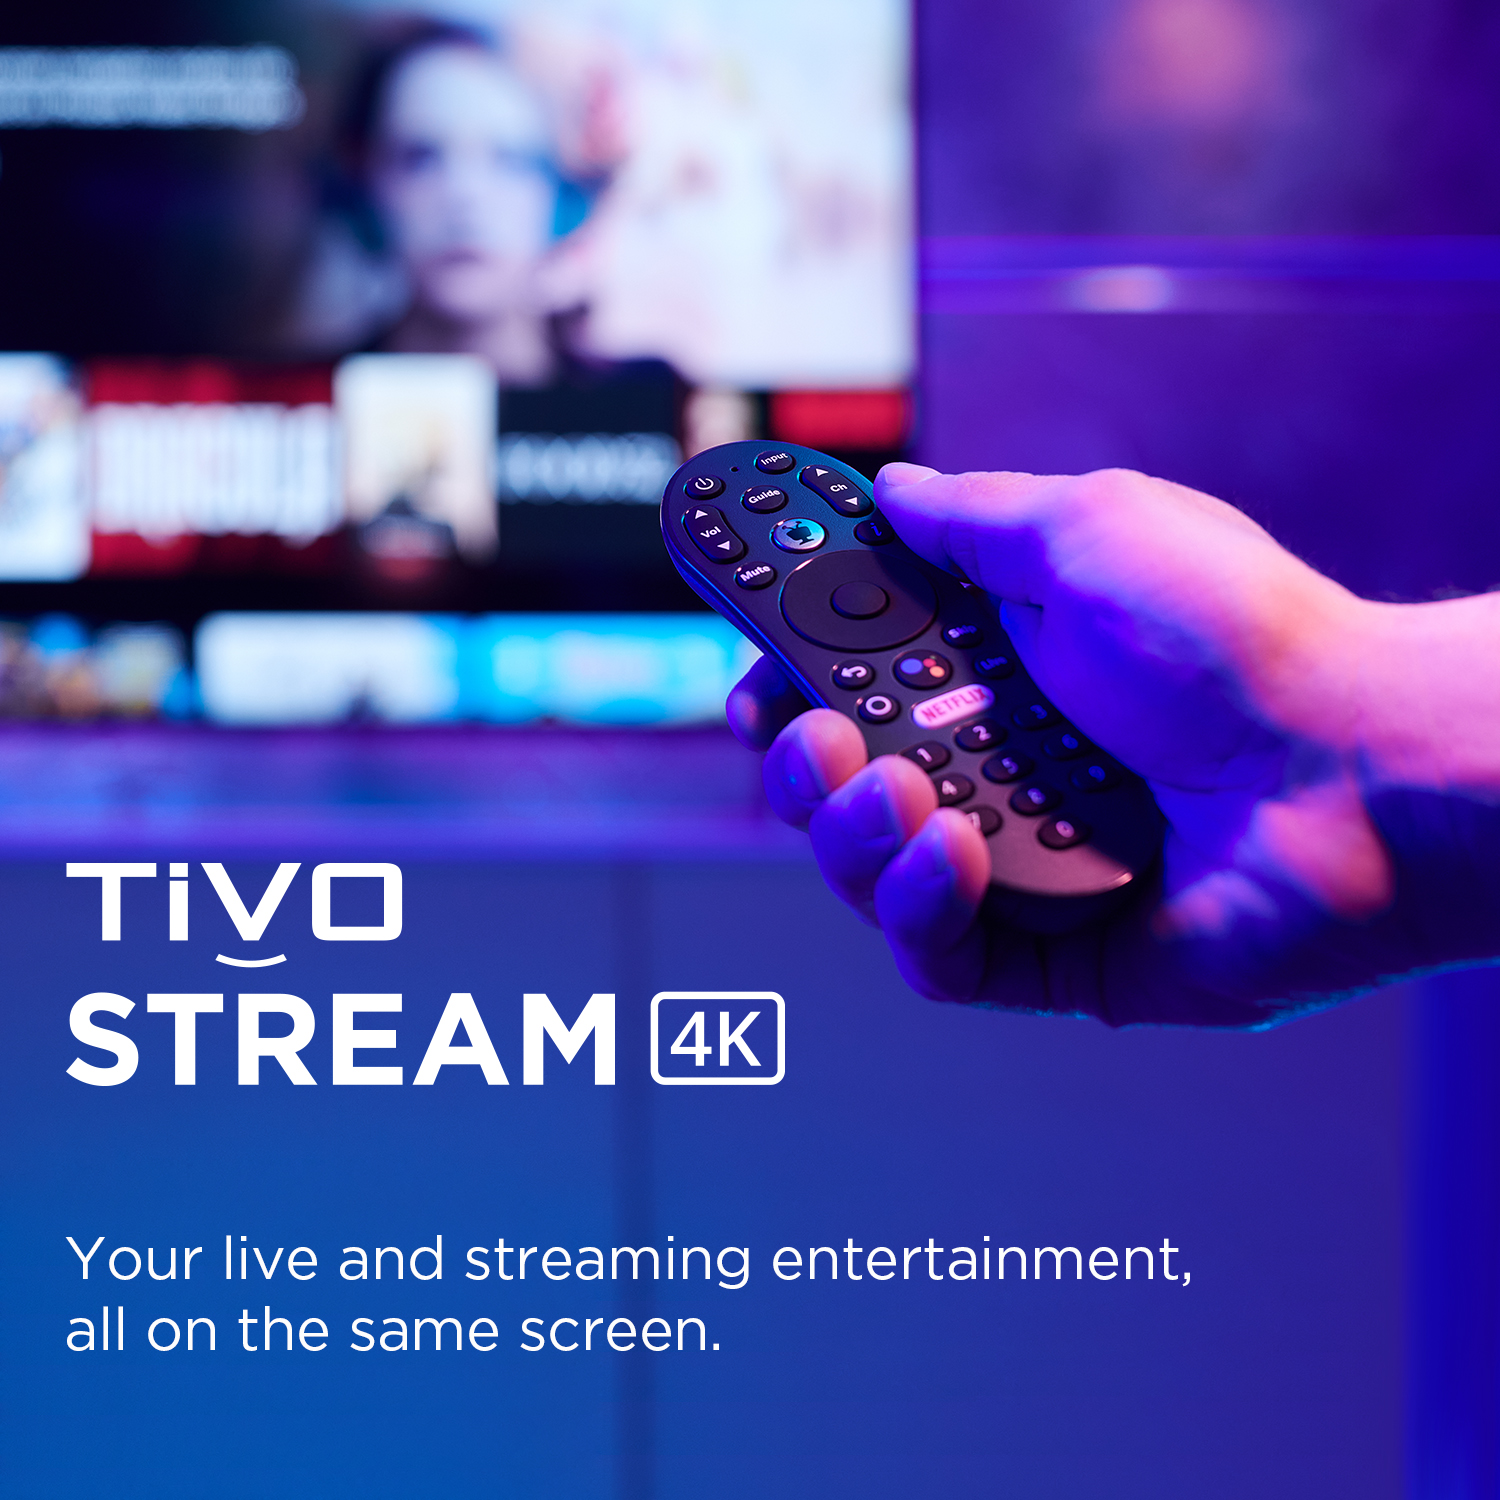 TiVo Stream 4K – Every Streaming App and Live TV on One Screen – 4K UHD, Dolby Vision HDR and Dolby Atmos Sound – Powered by Android TV – Plug-in Smart TV - image 5 of 9